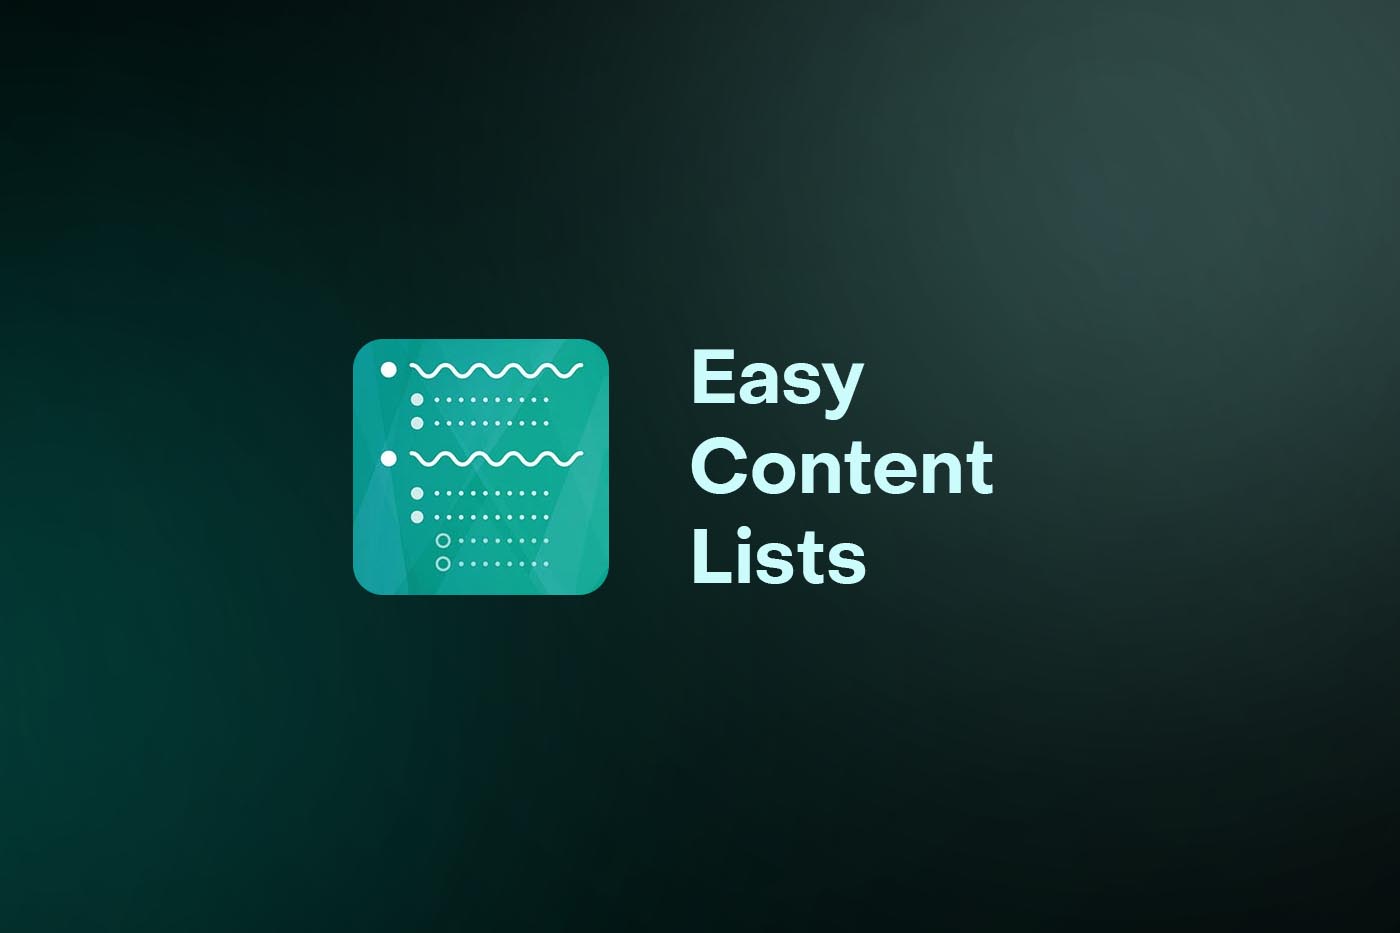 A minimalist graphic with a dark green gradient background features an icon of a document with various lines and dots, representing a list. Next to the icon, the words "Easy Content Lists" are displayed in light blue text.